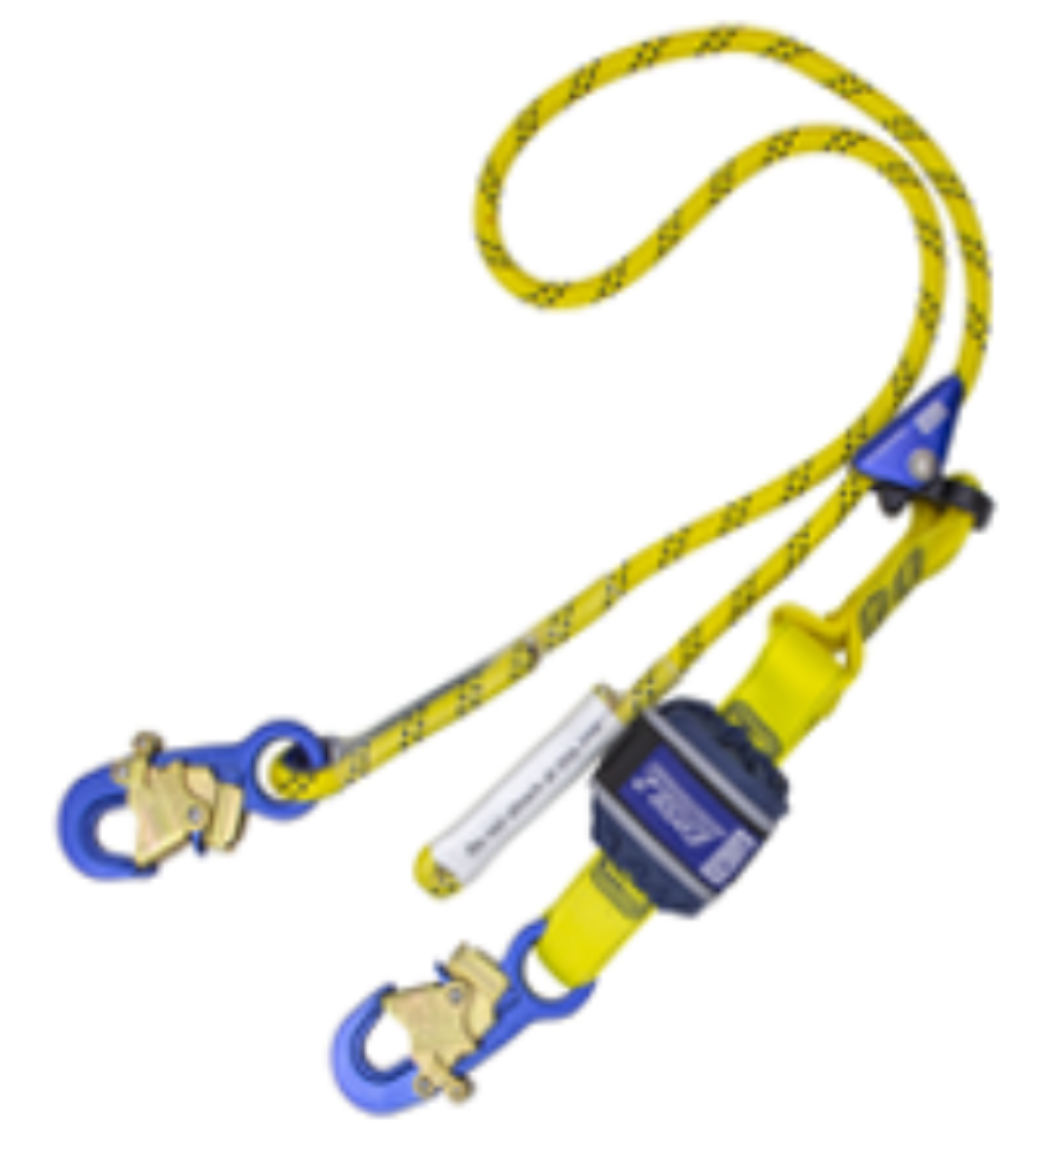 Picture of P68110022525Z 2M ADJUSTABLE ROPE LANYARD WITH FORCE 2 SHOCK PACK AND 2 BLUE ALUMINIUM SNAP HOOKS